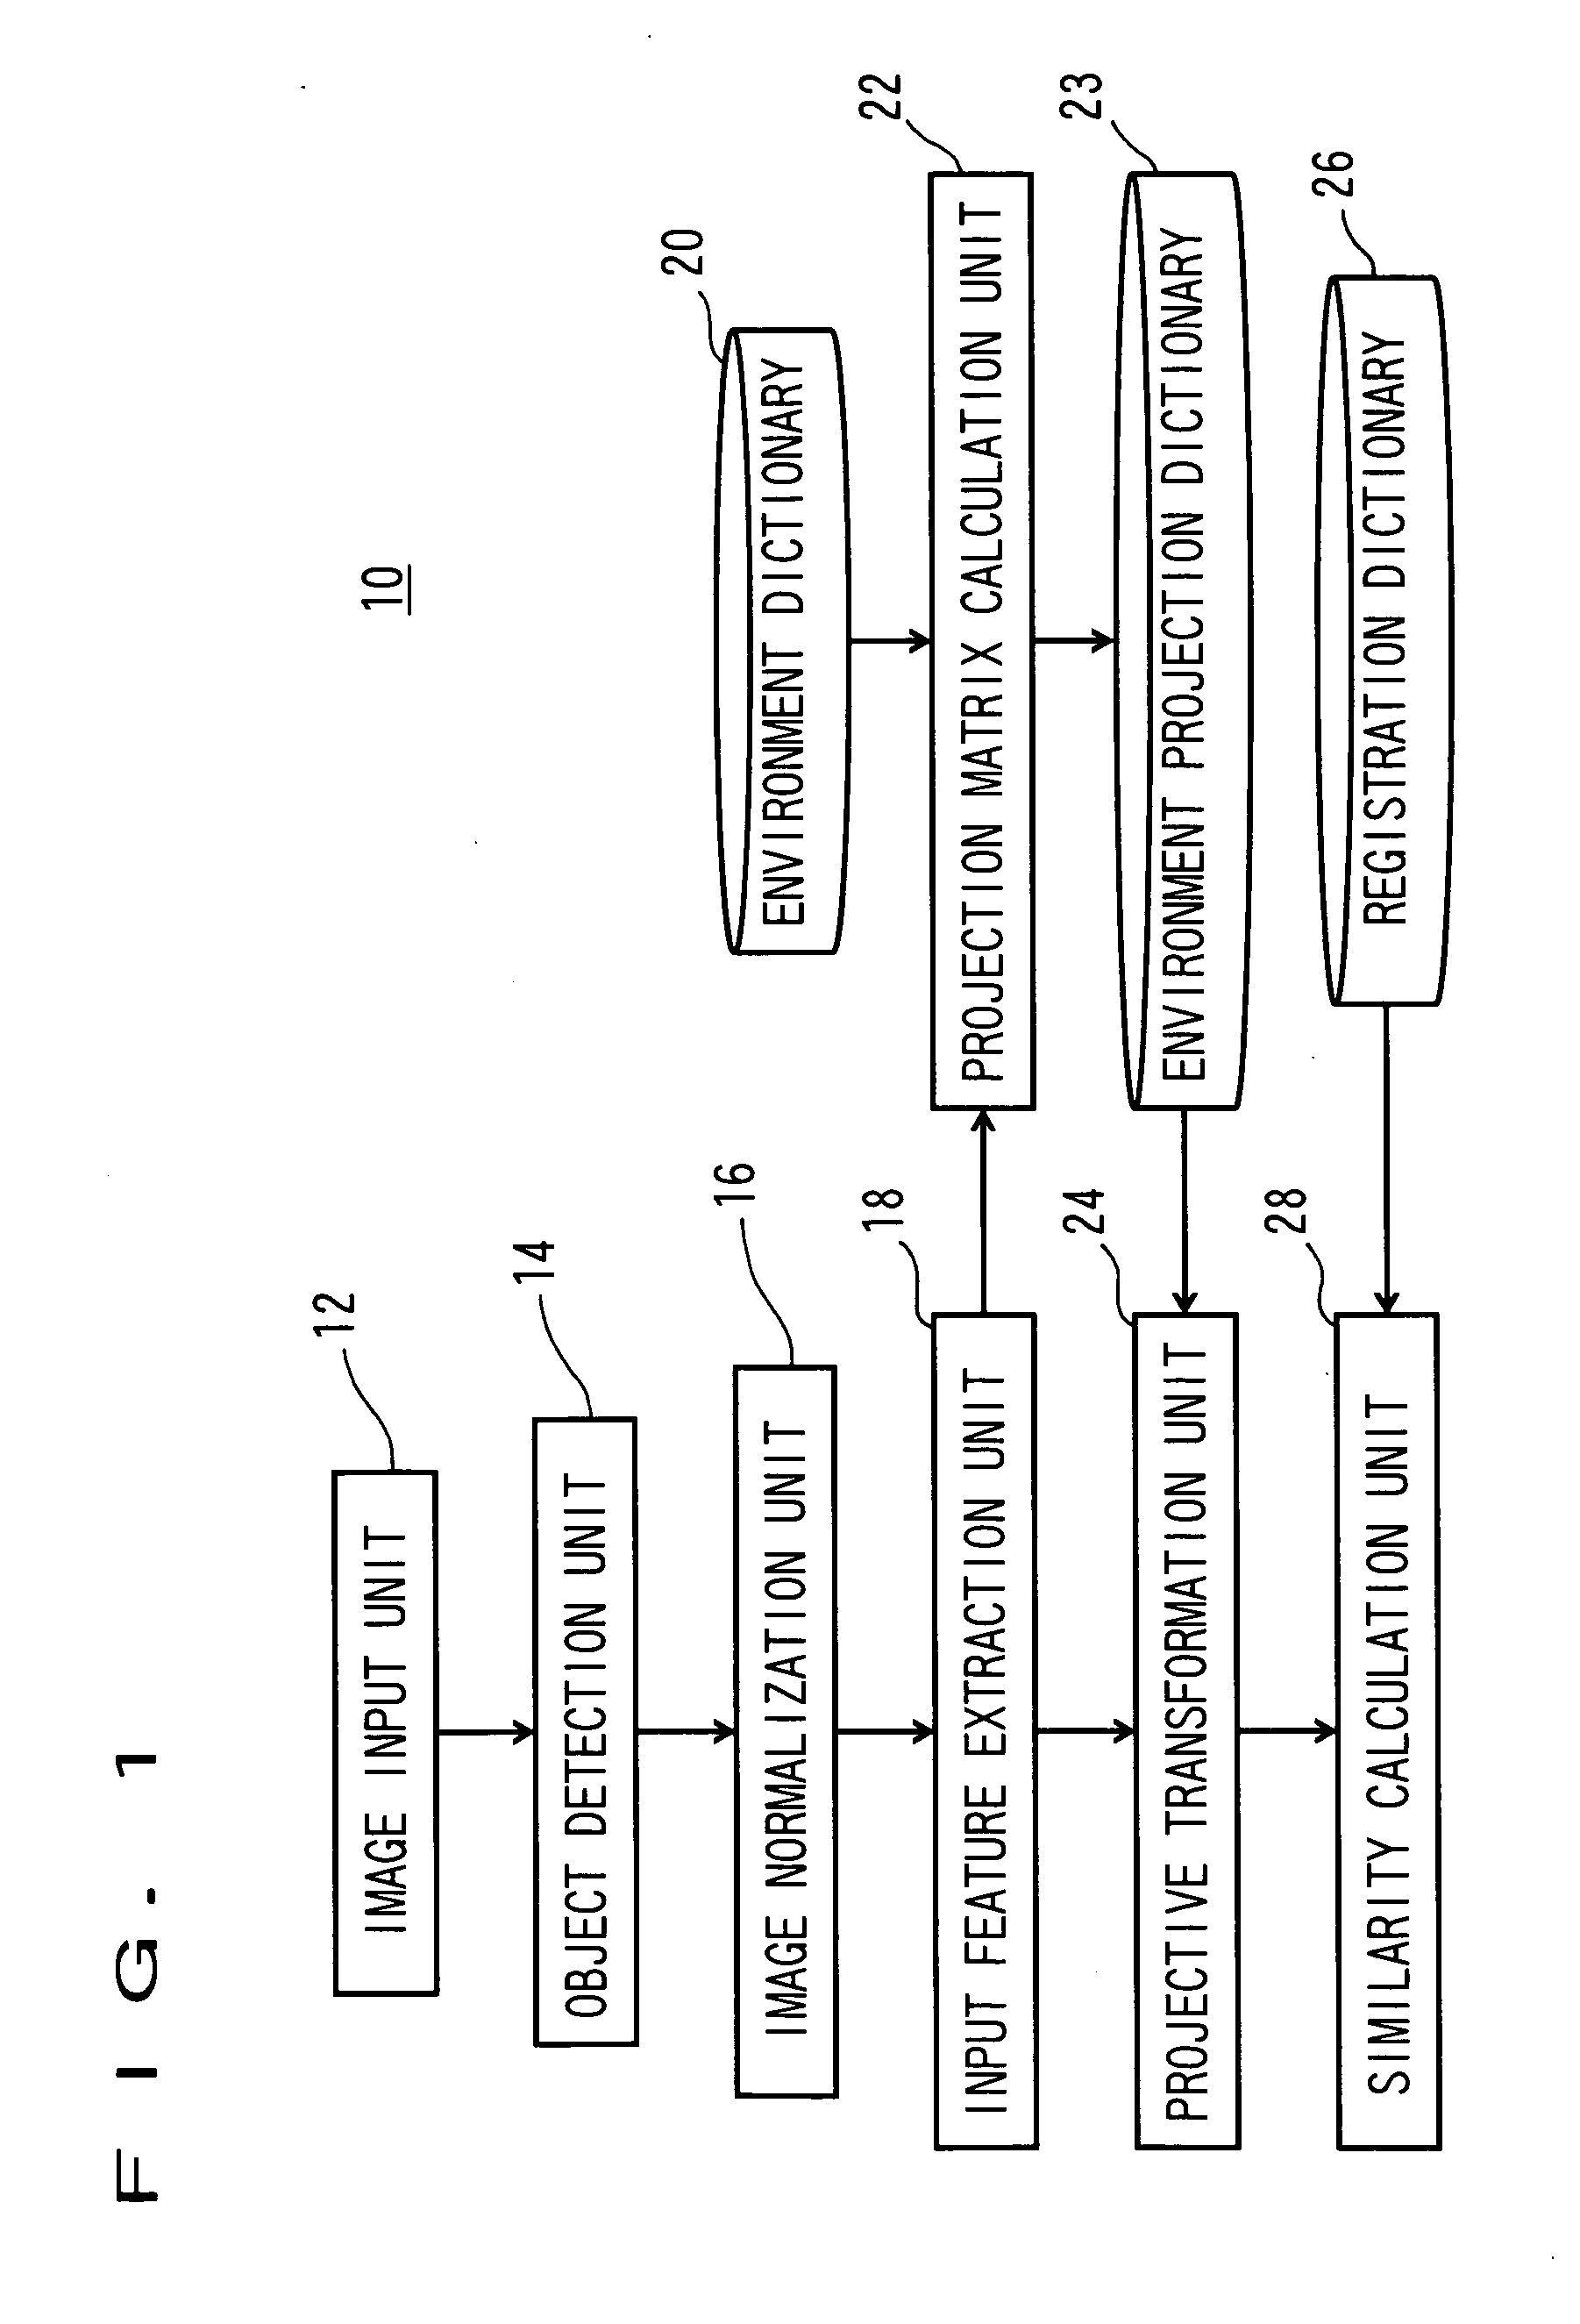 Image recognition apparatus and its method